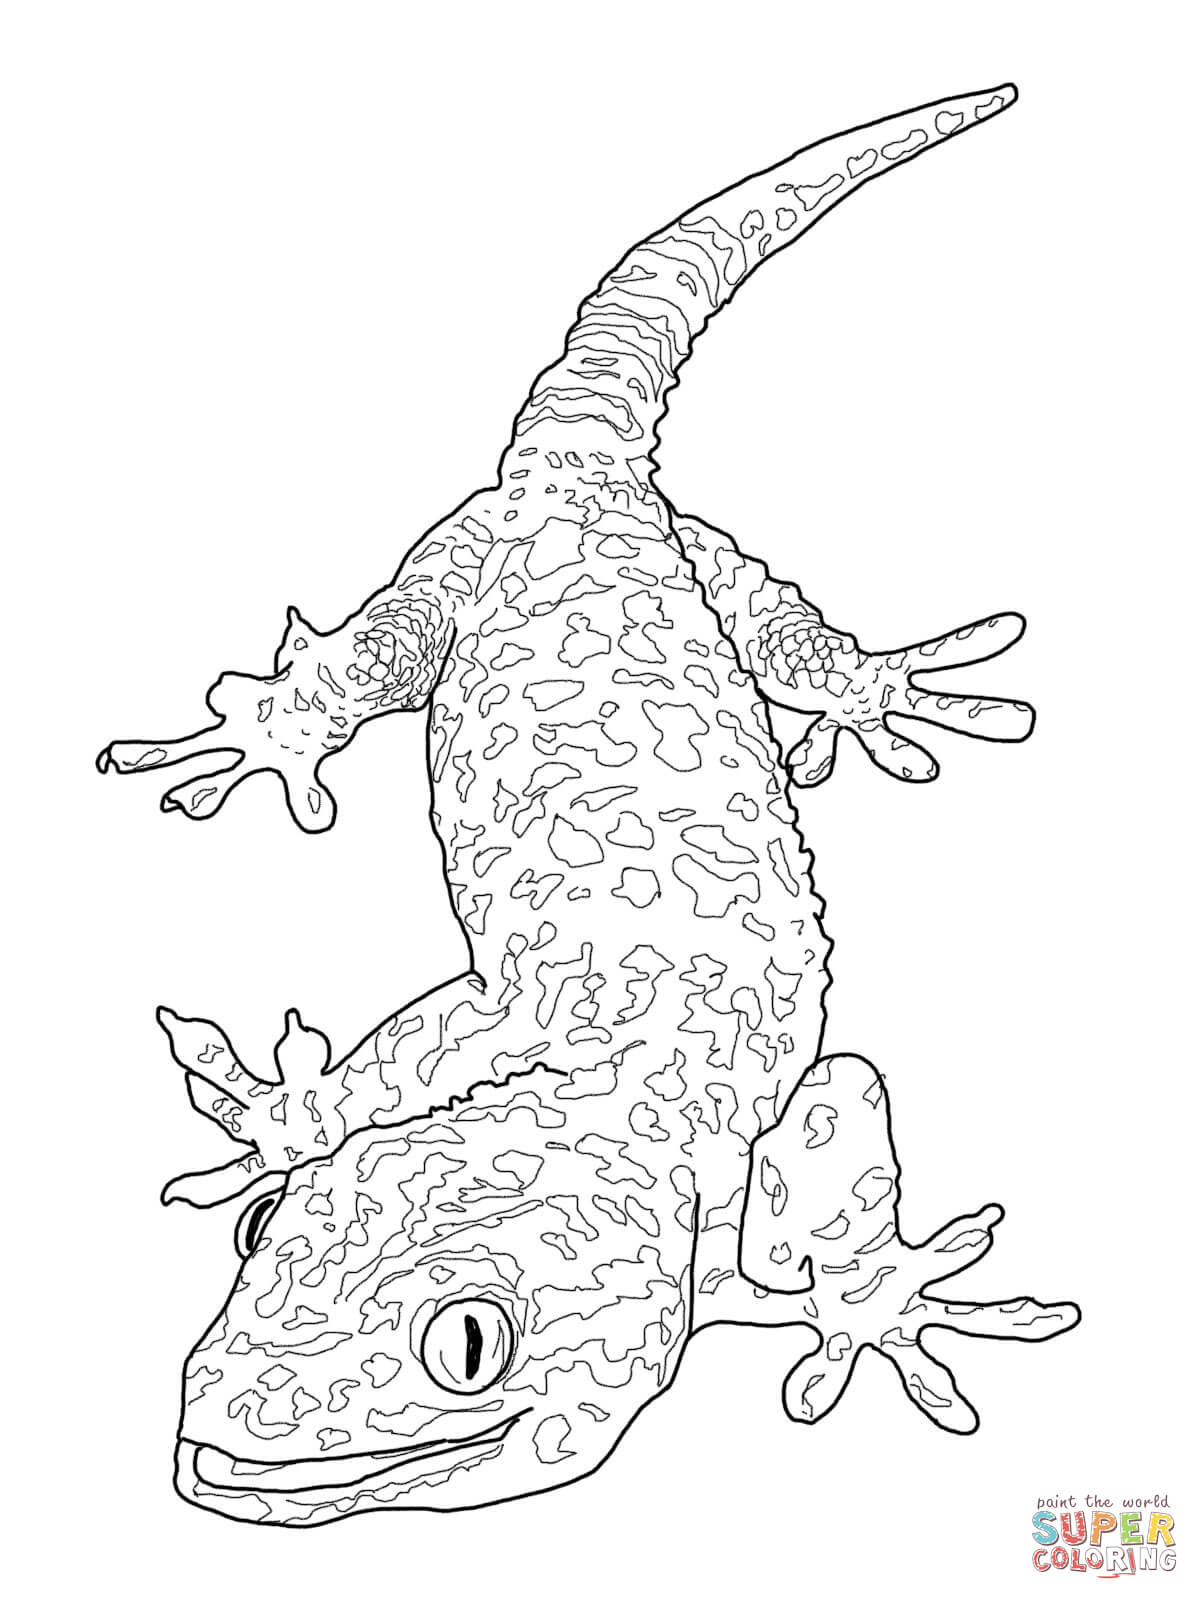 Bearded Dragon coloring, Download Bearded Dragon coloring for free 2019